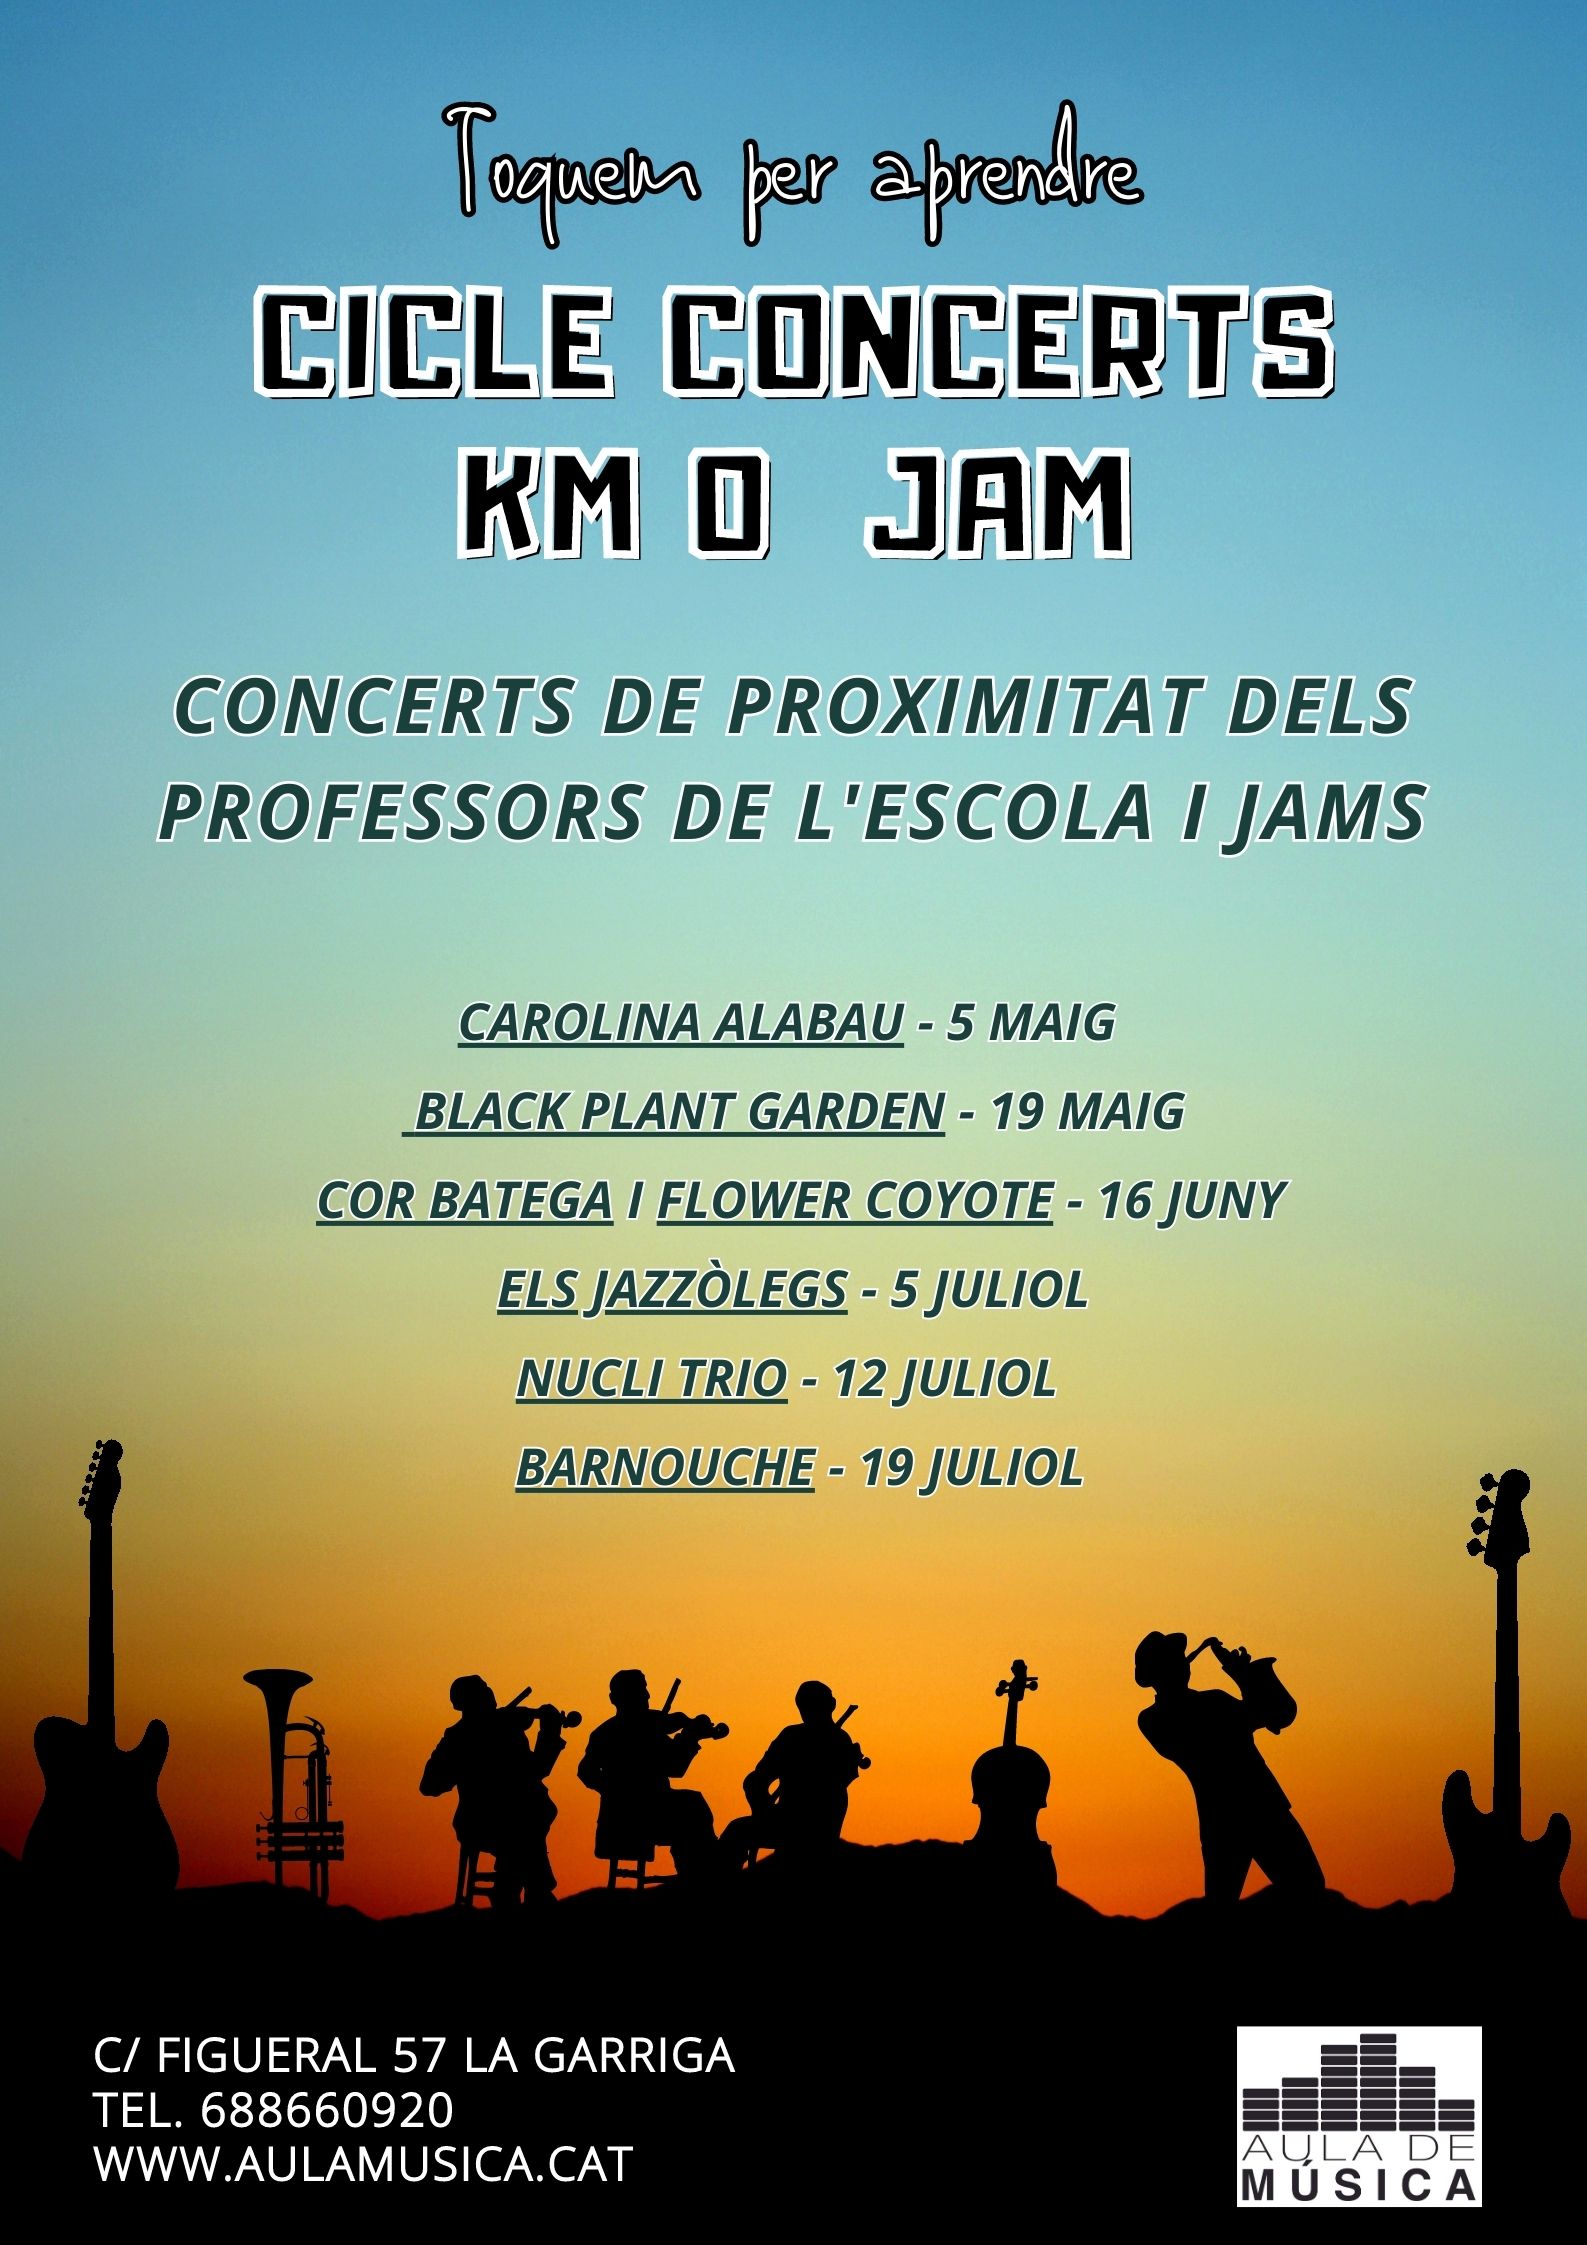 CICLES CONCERTS KM JAM